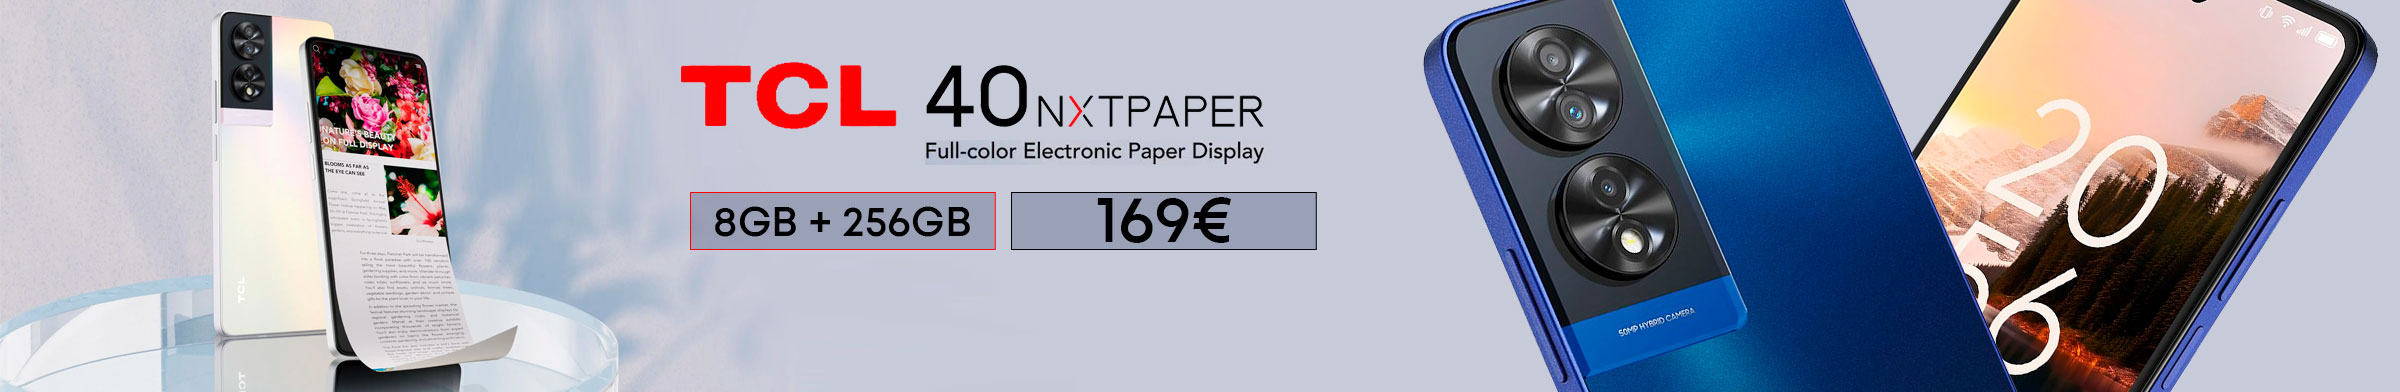 TCL 40 NXTPAPER 4G